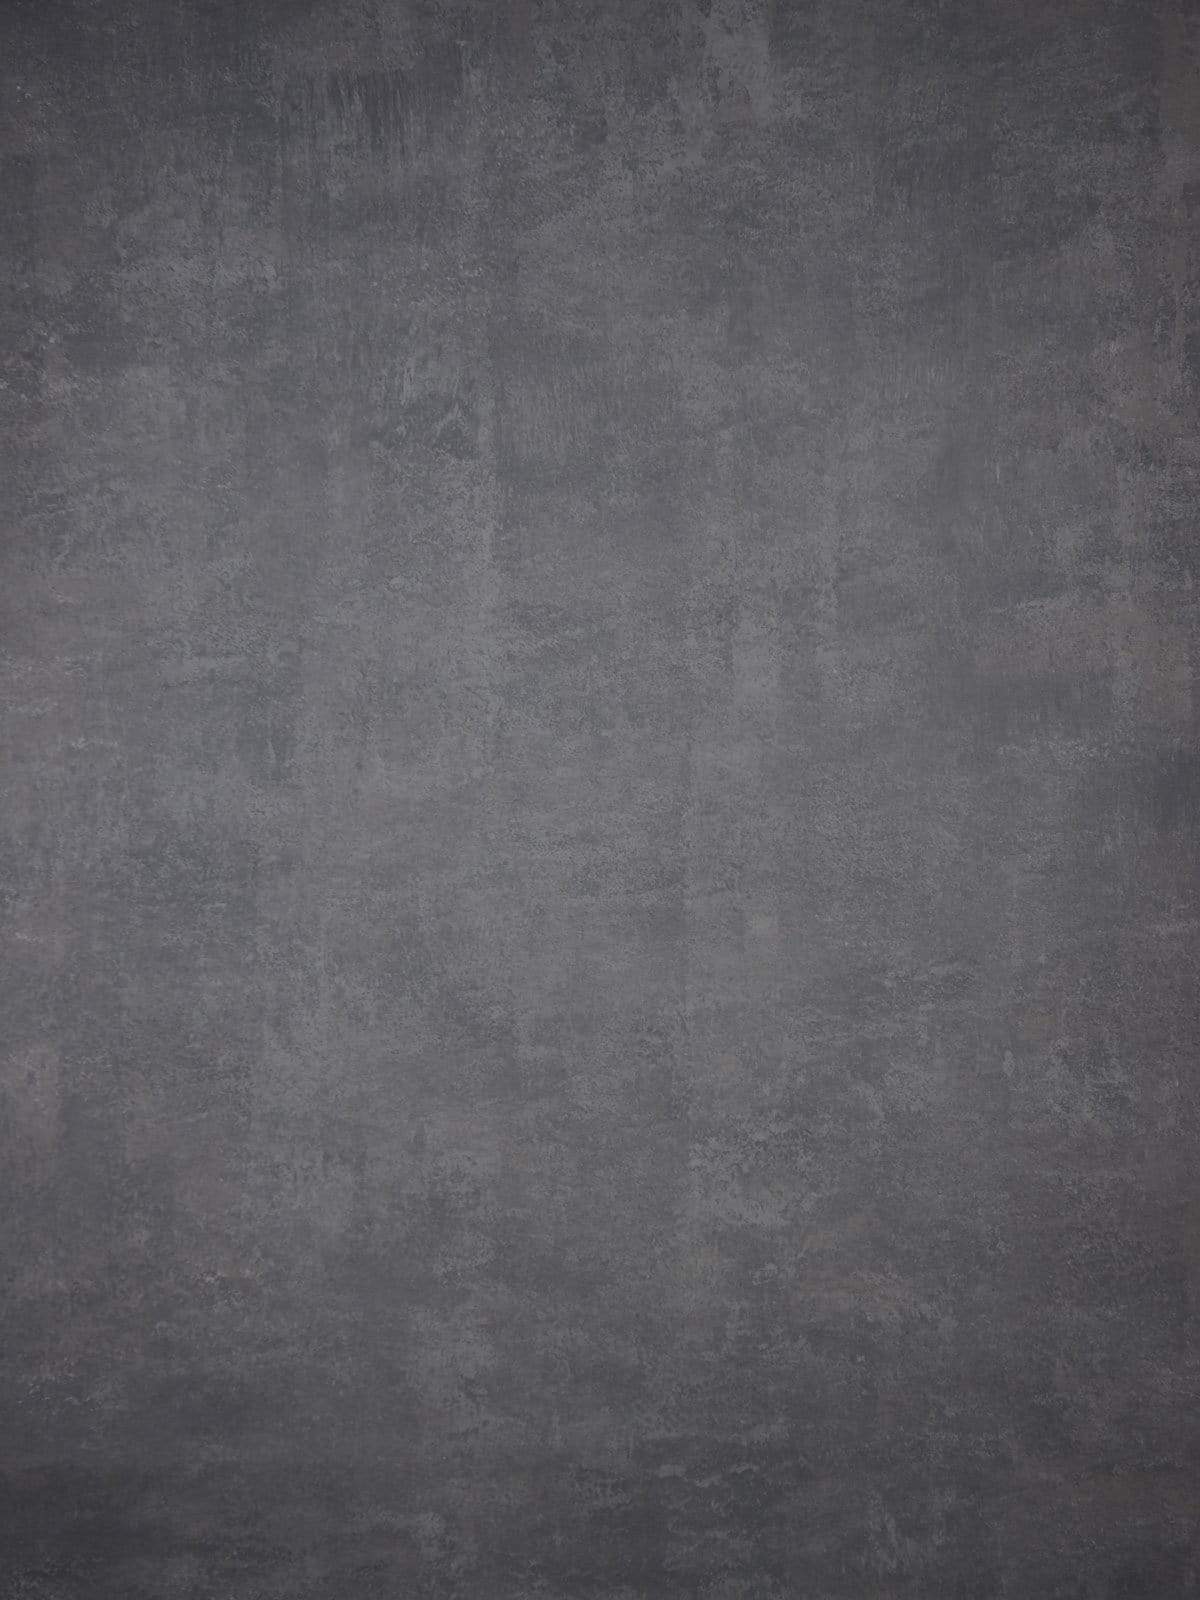 Kate Abstract Textured Dark Grey Backdrop for Photography